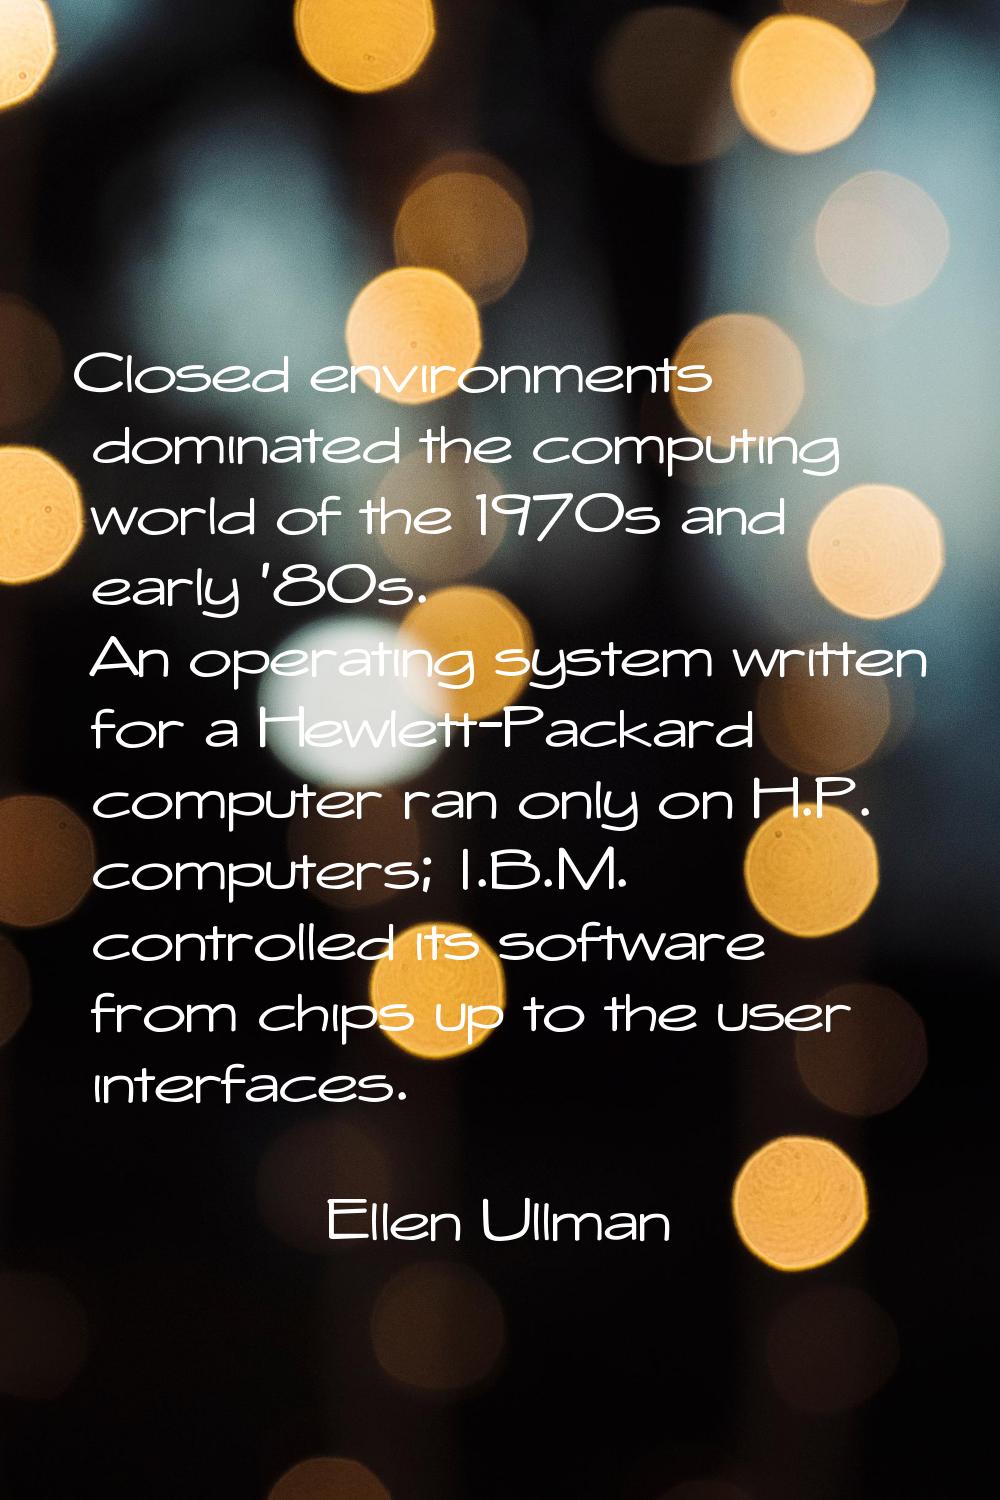 Closed environments dominated the computing world of the 1970s and early '80s. An operating system 